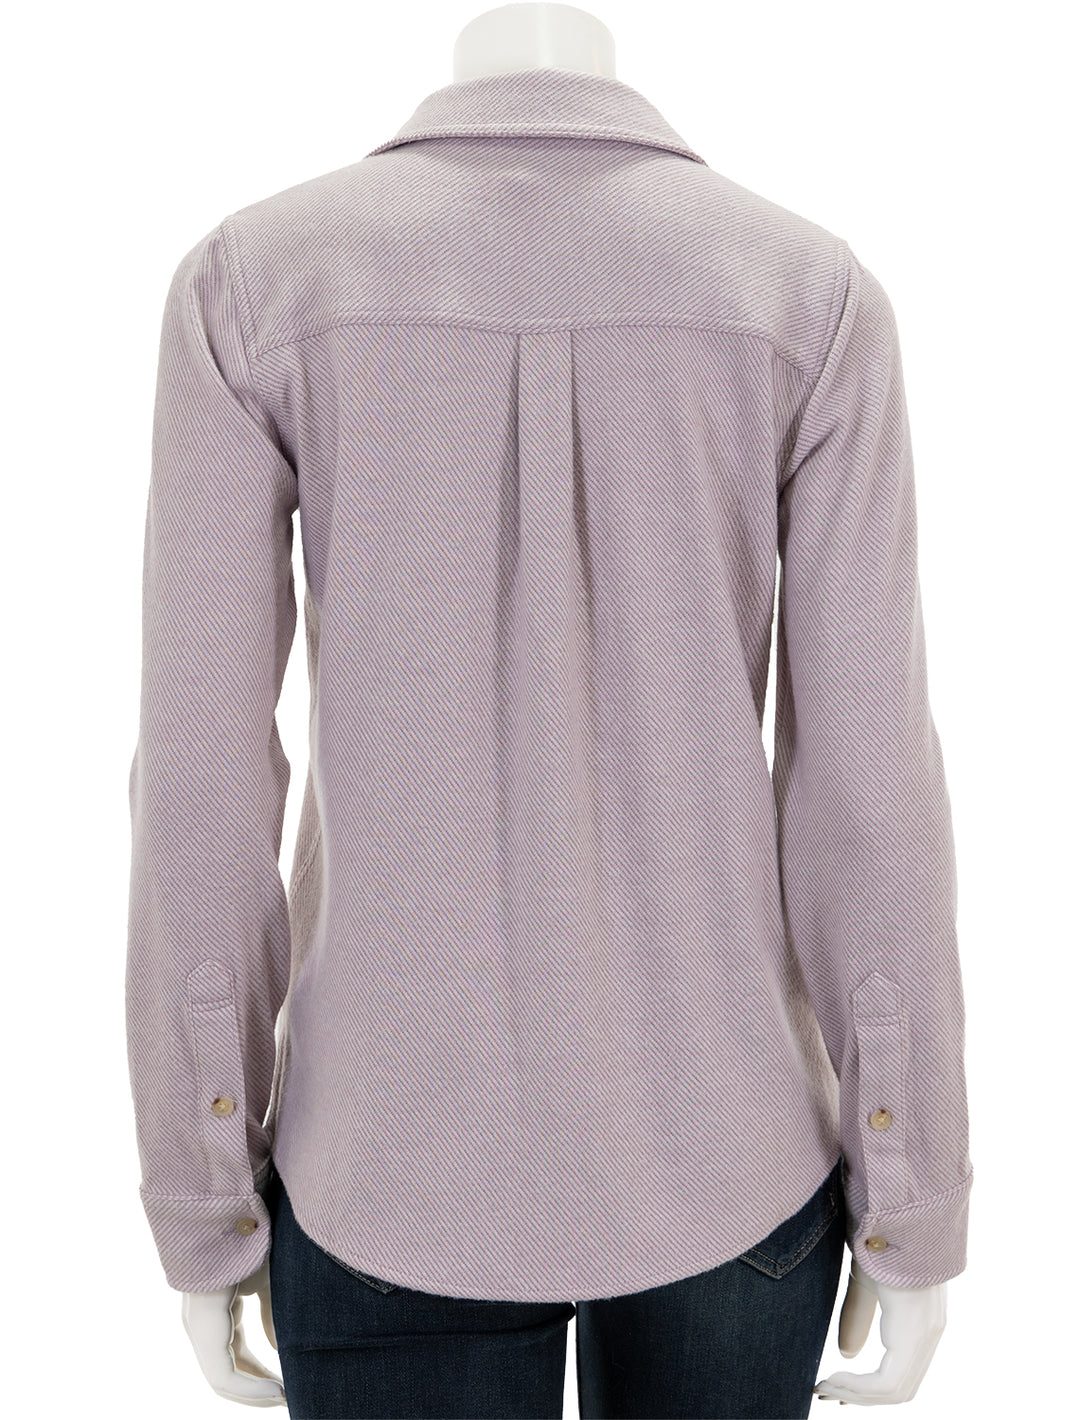 Back view of Faherty's legend sweater shirt in sea fog.